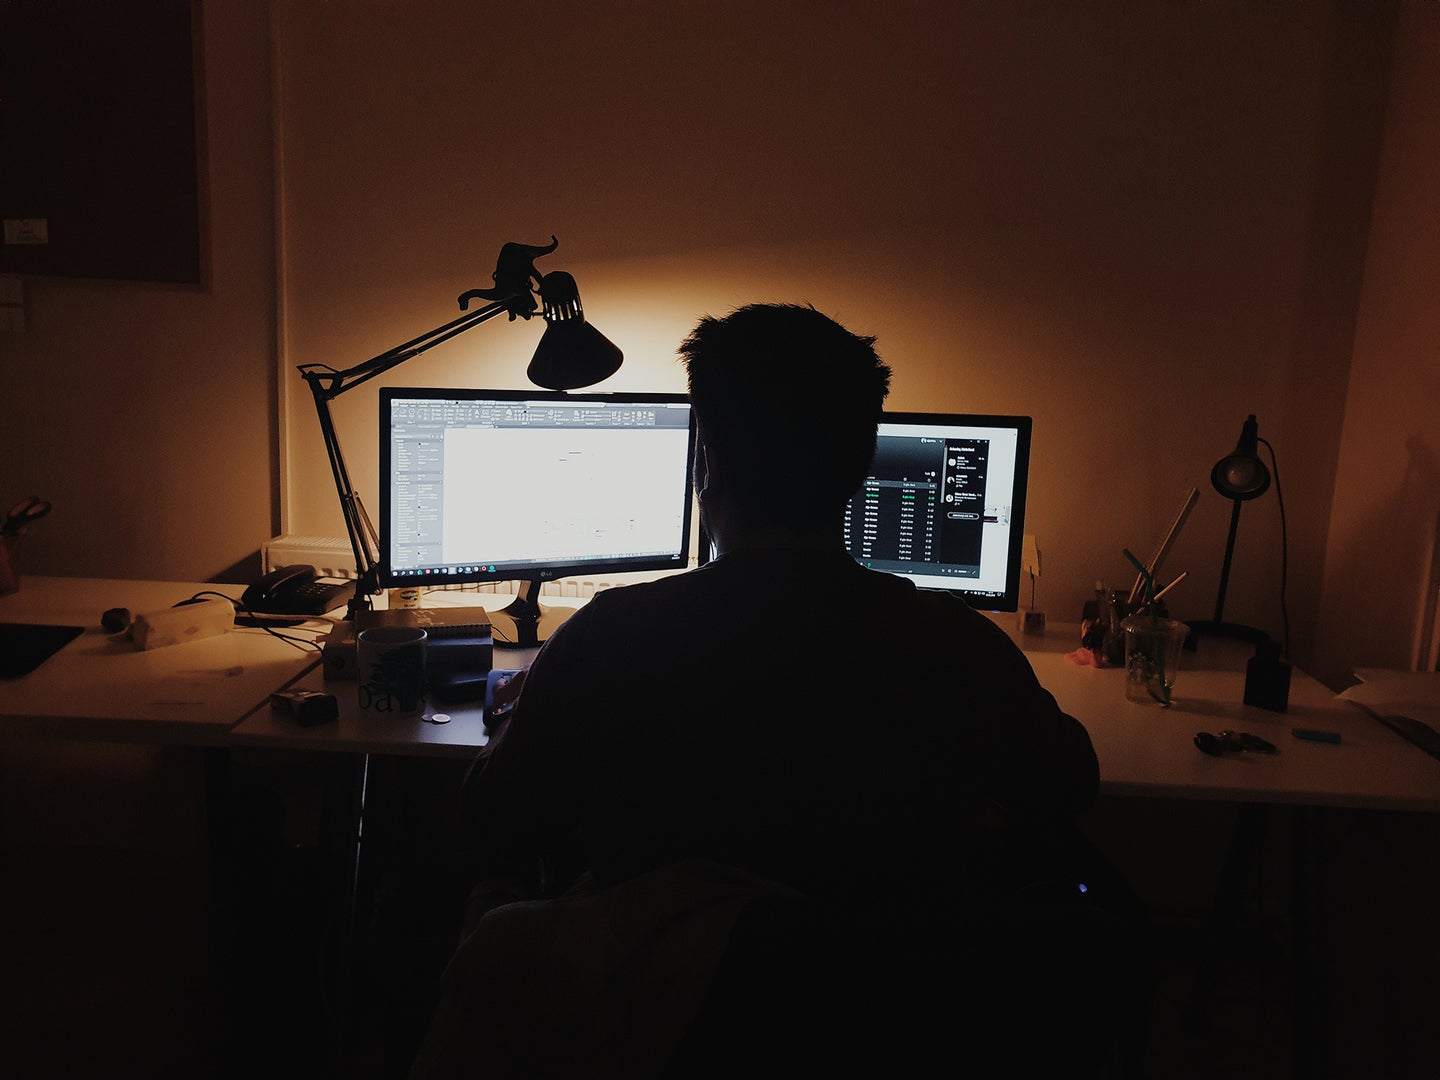 person sitting in a dark room with a lamp and two computer monitors on a desk